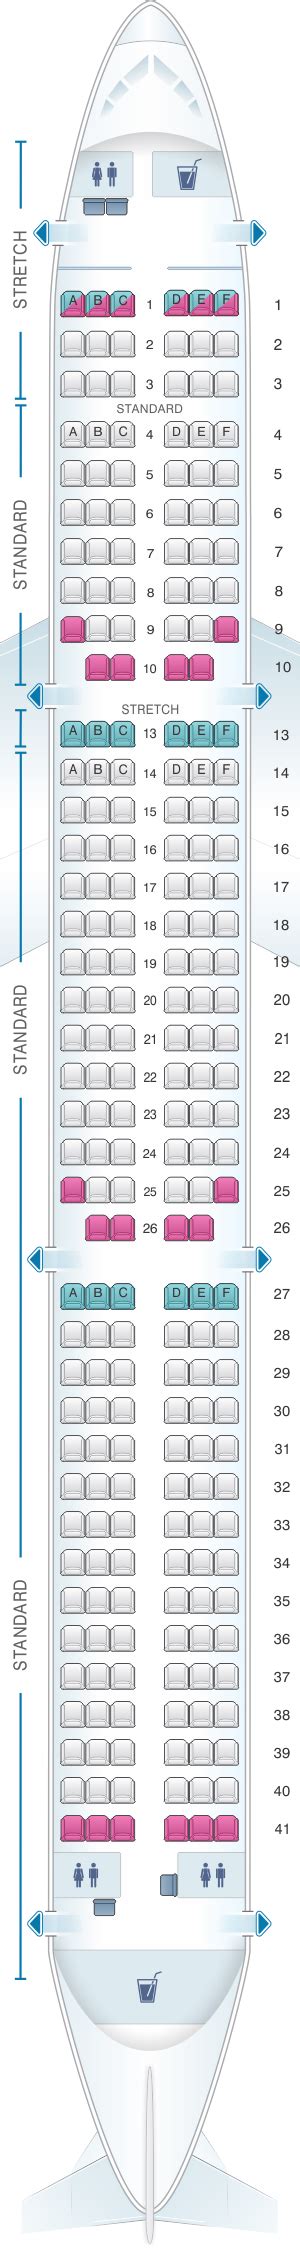 Second version of Airbus A319 offers 138 seats of two types: stretch and economy. This airplane has 24 seats if stretch type. The only difference of these seats from economy seats is extra 8 inches of legroom. These seats may be selected when purchased or directly at the airport at time of check-in. First 3 rows of seats that have 3-3 ...